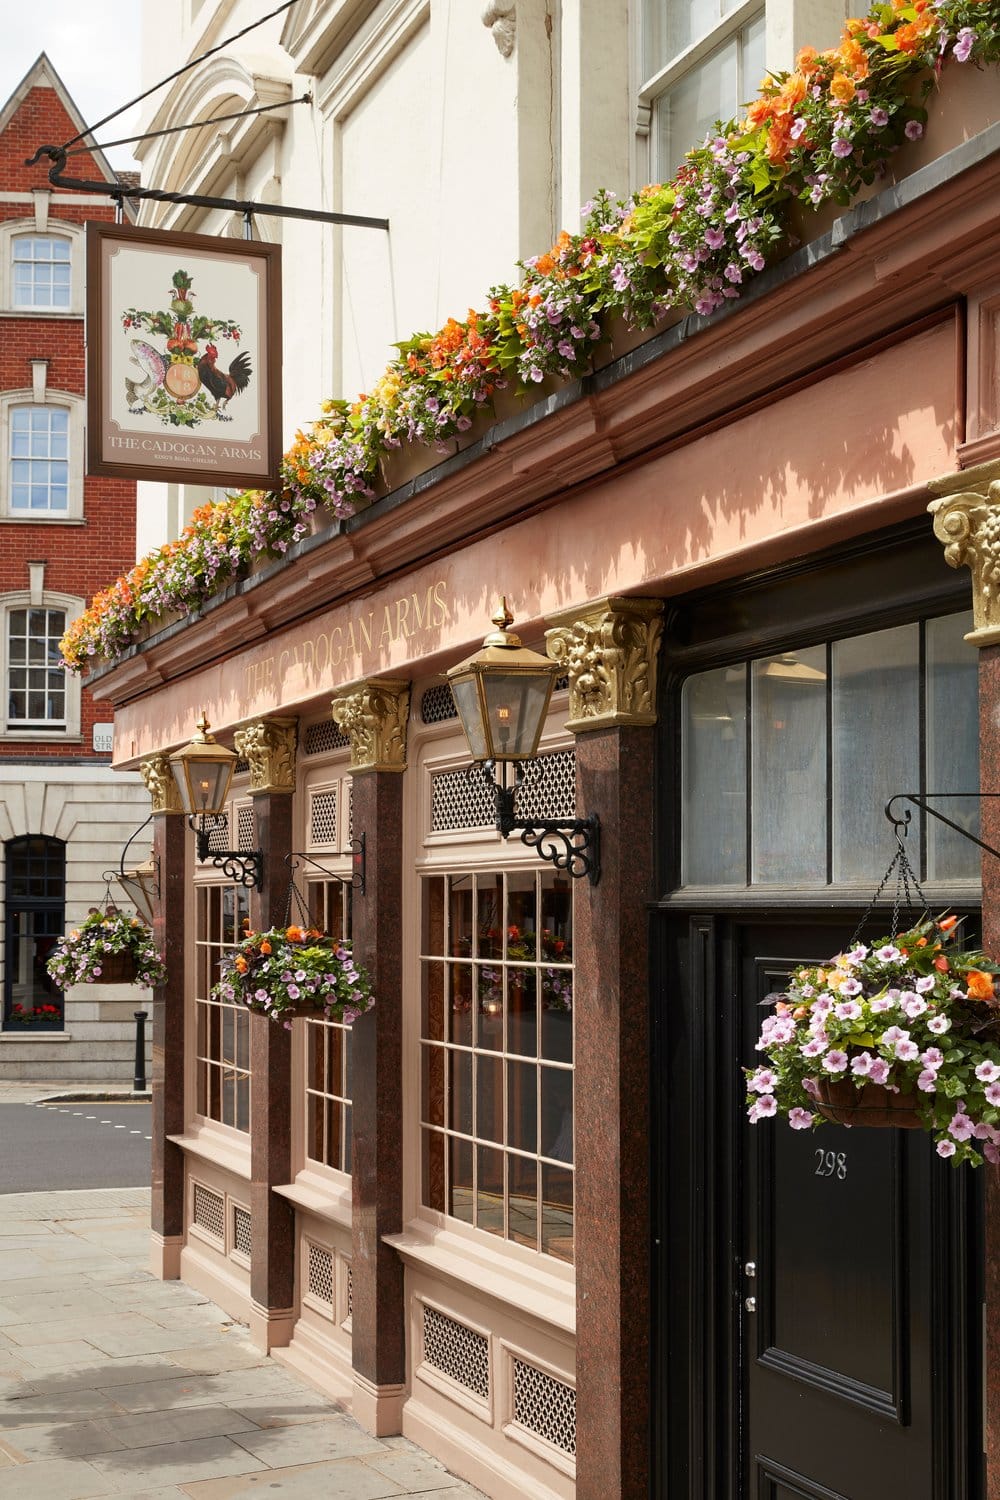 pub entrance with flowers hanging